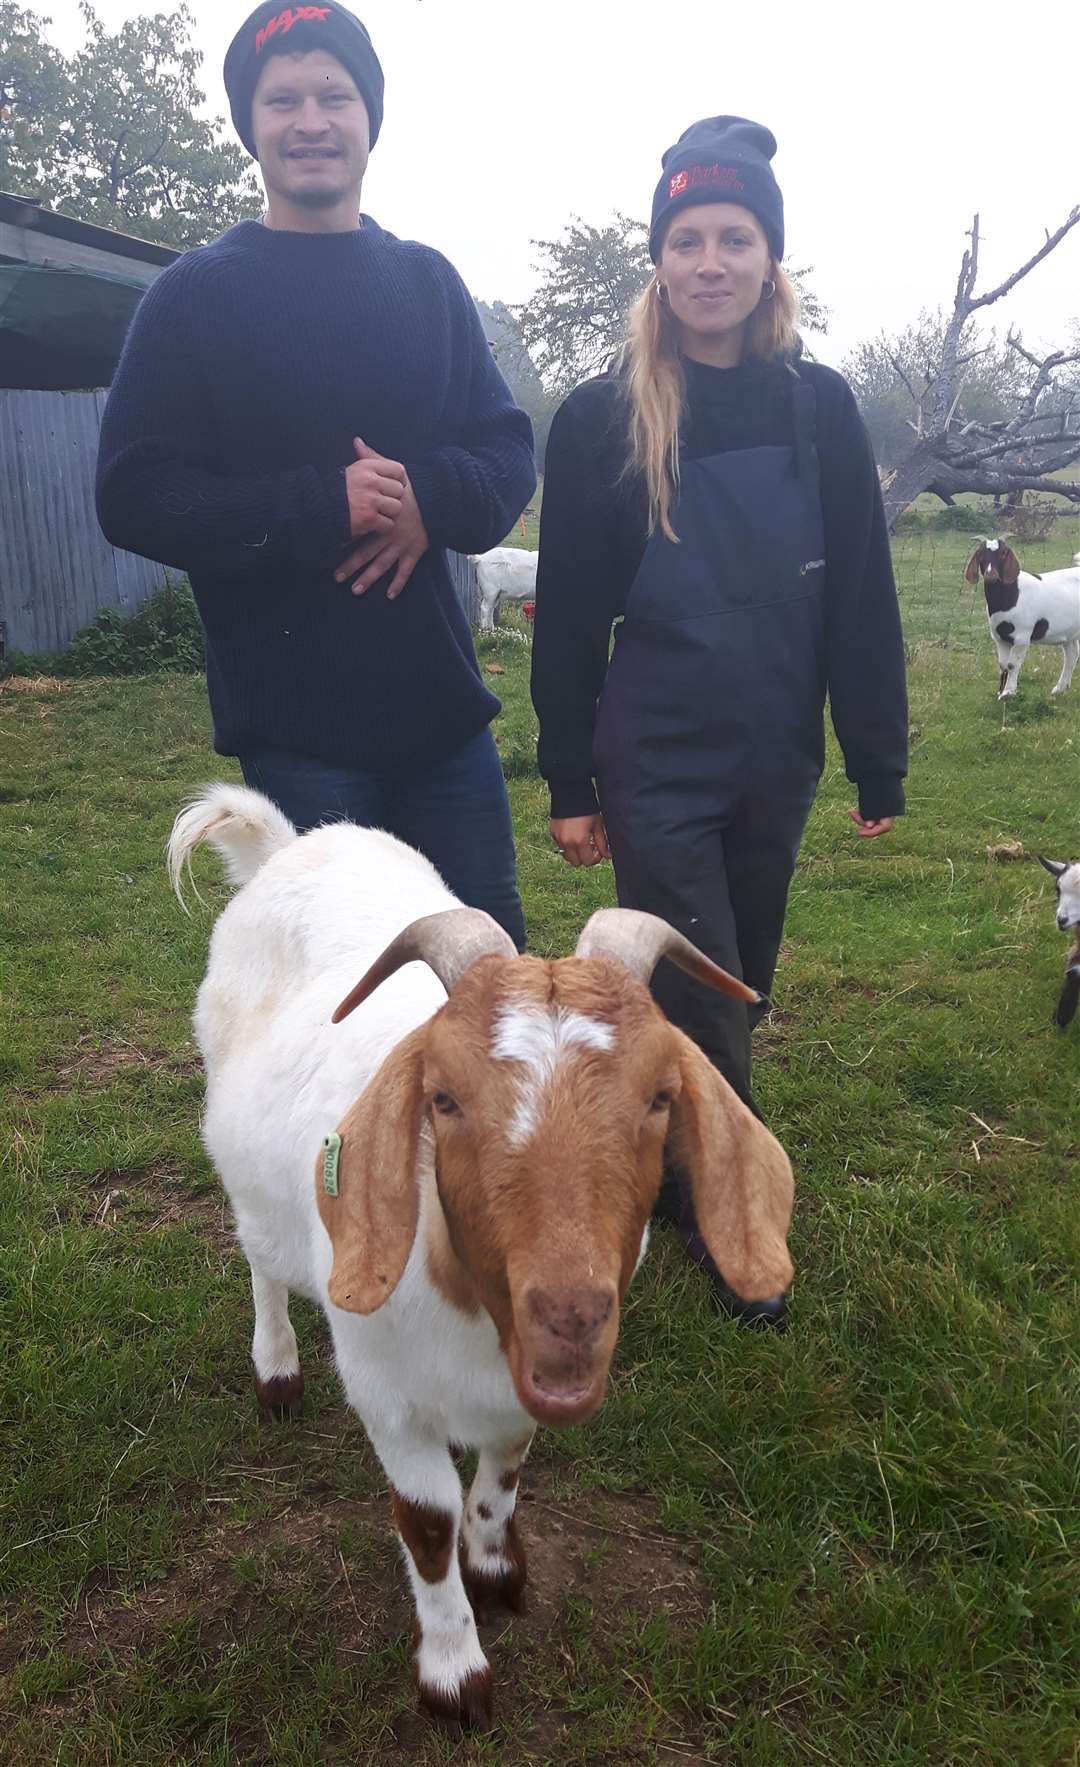 Chris Woodhead and Zoe Colville with one of their Boer goats